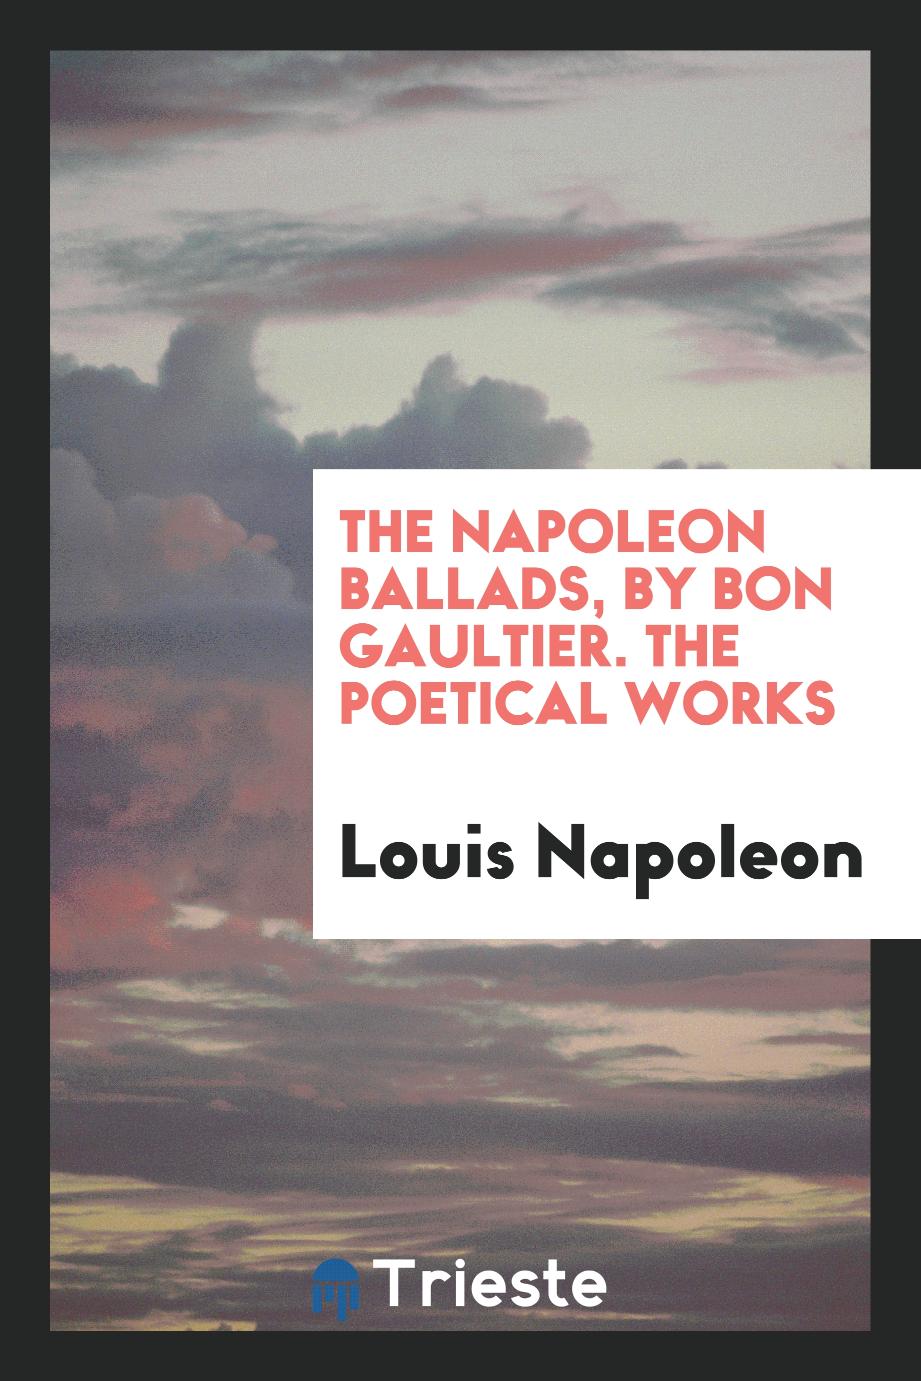 The Napoleon Ballads, by Bon Gaultier. The Poetical Works